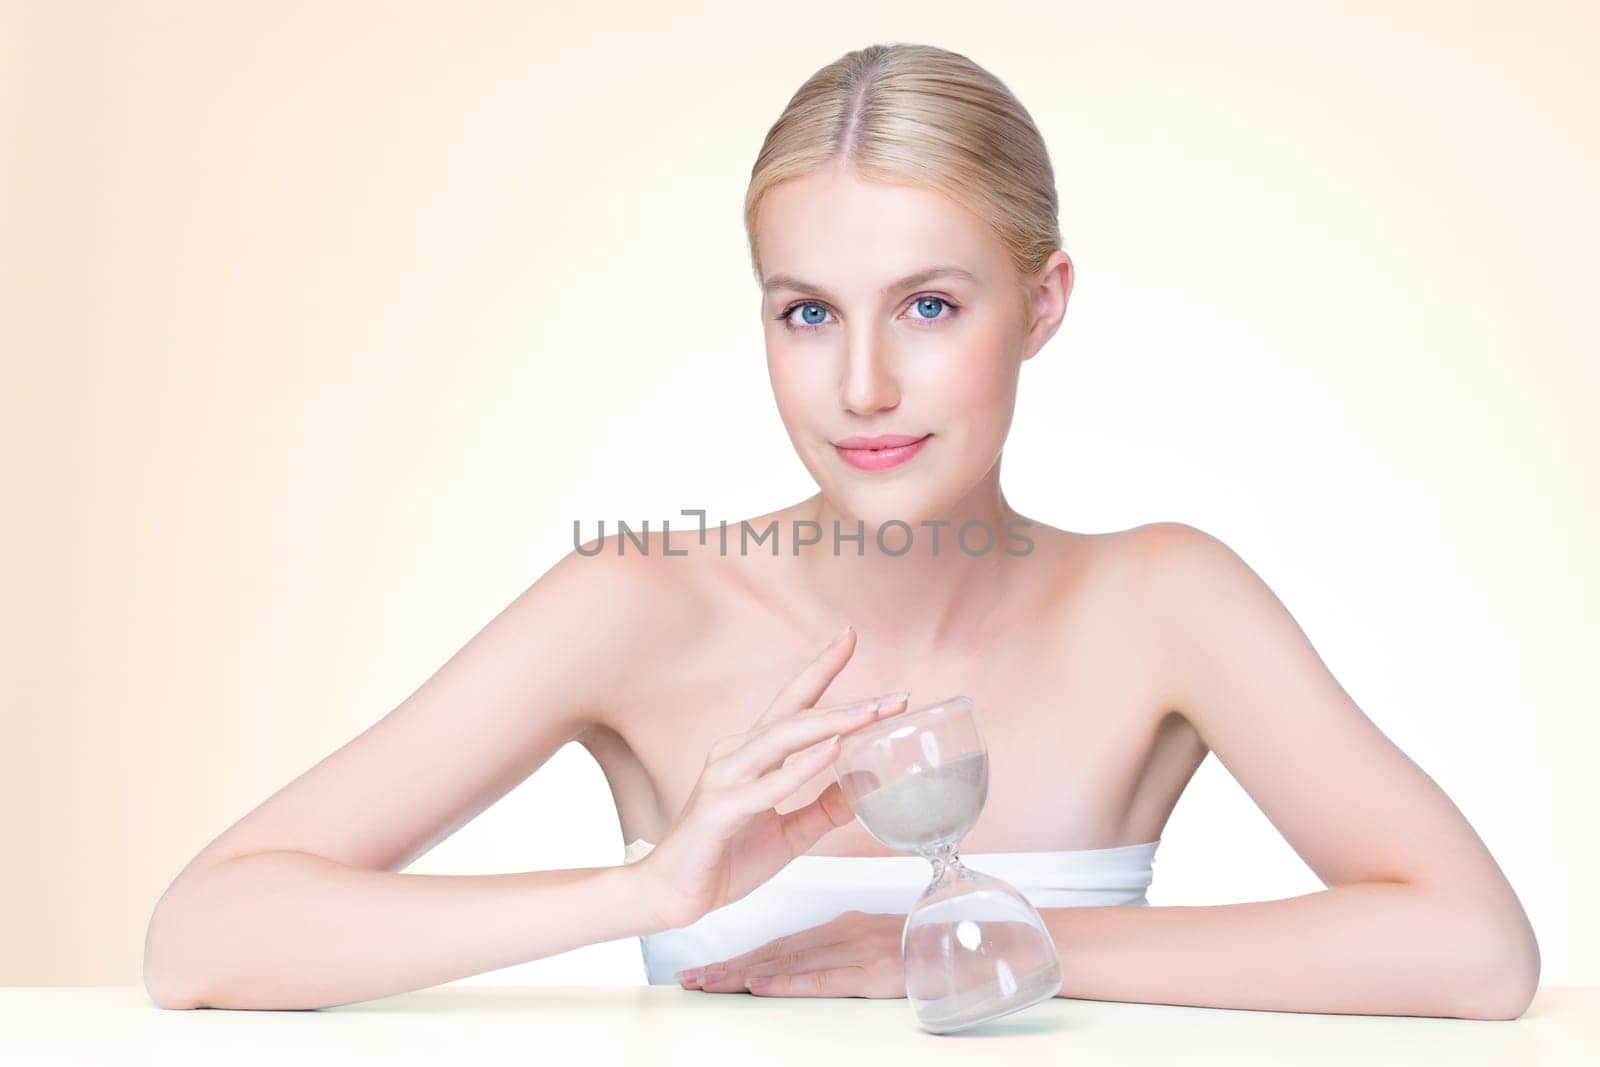 Personable model holding hourglass in beauty concept of anti-aging skincare treatment for woman. Young girl portrait with perfect smooth clean skin and flawless soft makeup in isolated background.